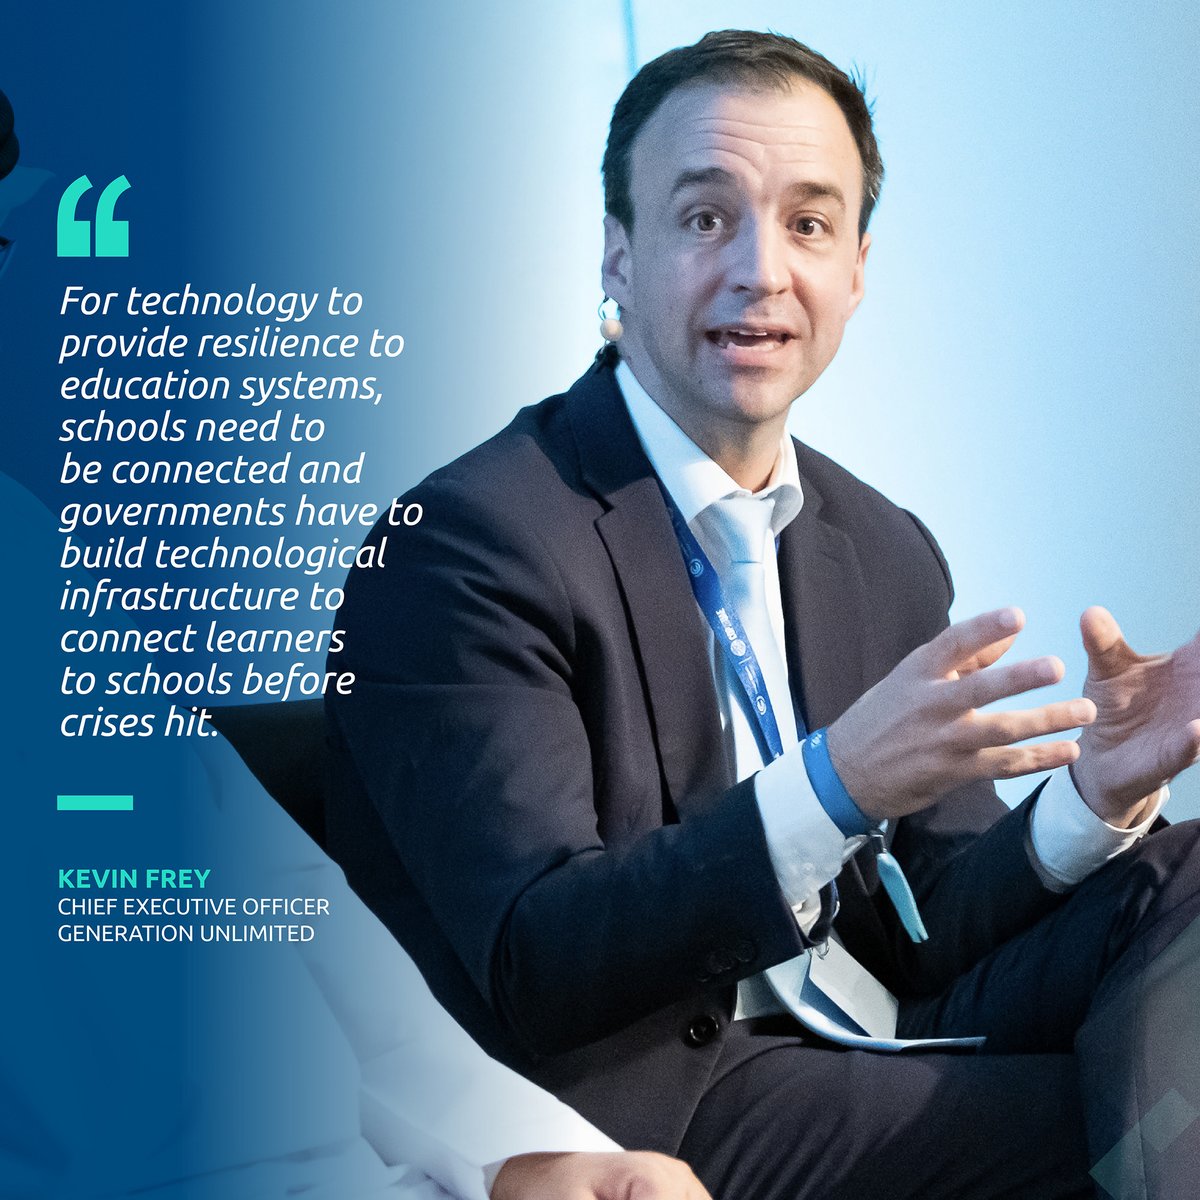 Speaking about the importance of building resilience for #education in the face of #climatechange, Dr. Kevin Frey, CEO of @GenUnlimited_ highlighted the importance of investing in #technological infrastructure to ensure continuous #connectivity for #learners and to mitigate…